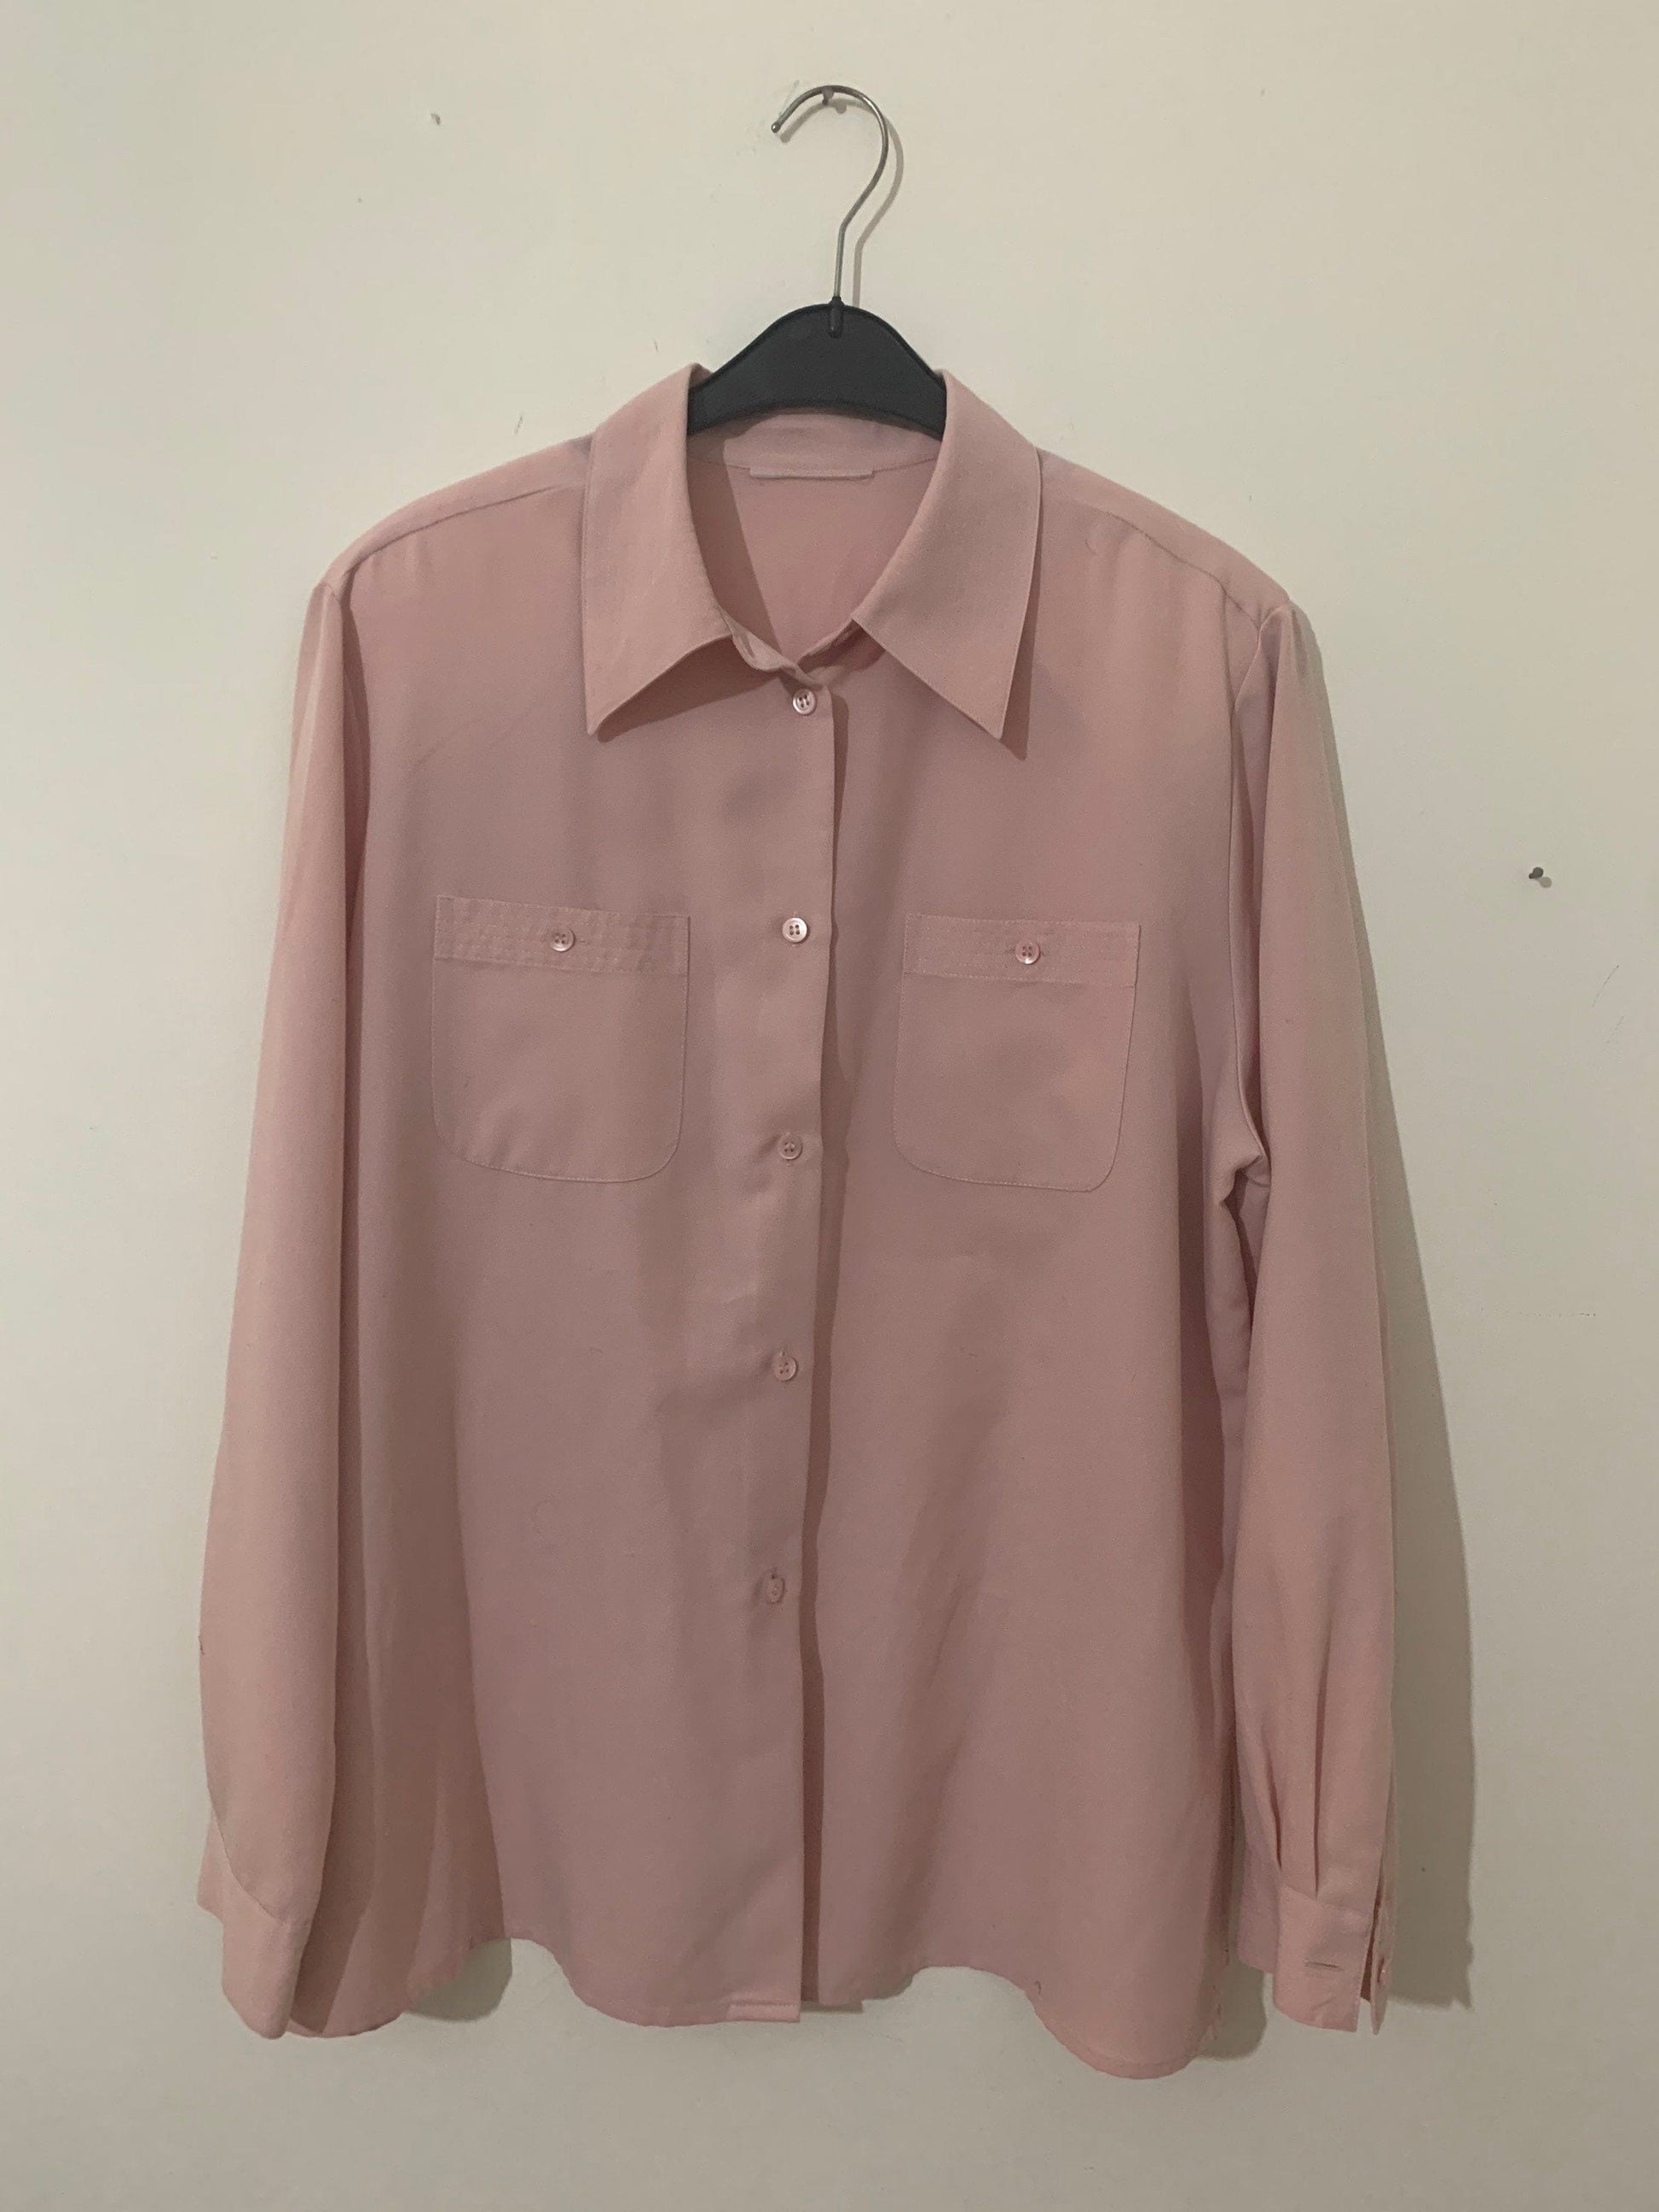 Pink Vintage Blouse Semi Sheer Button Through Boxy long Sleeves - Size 14